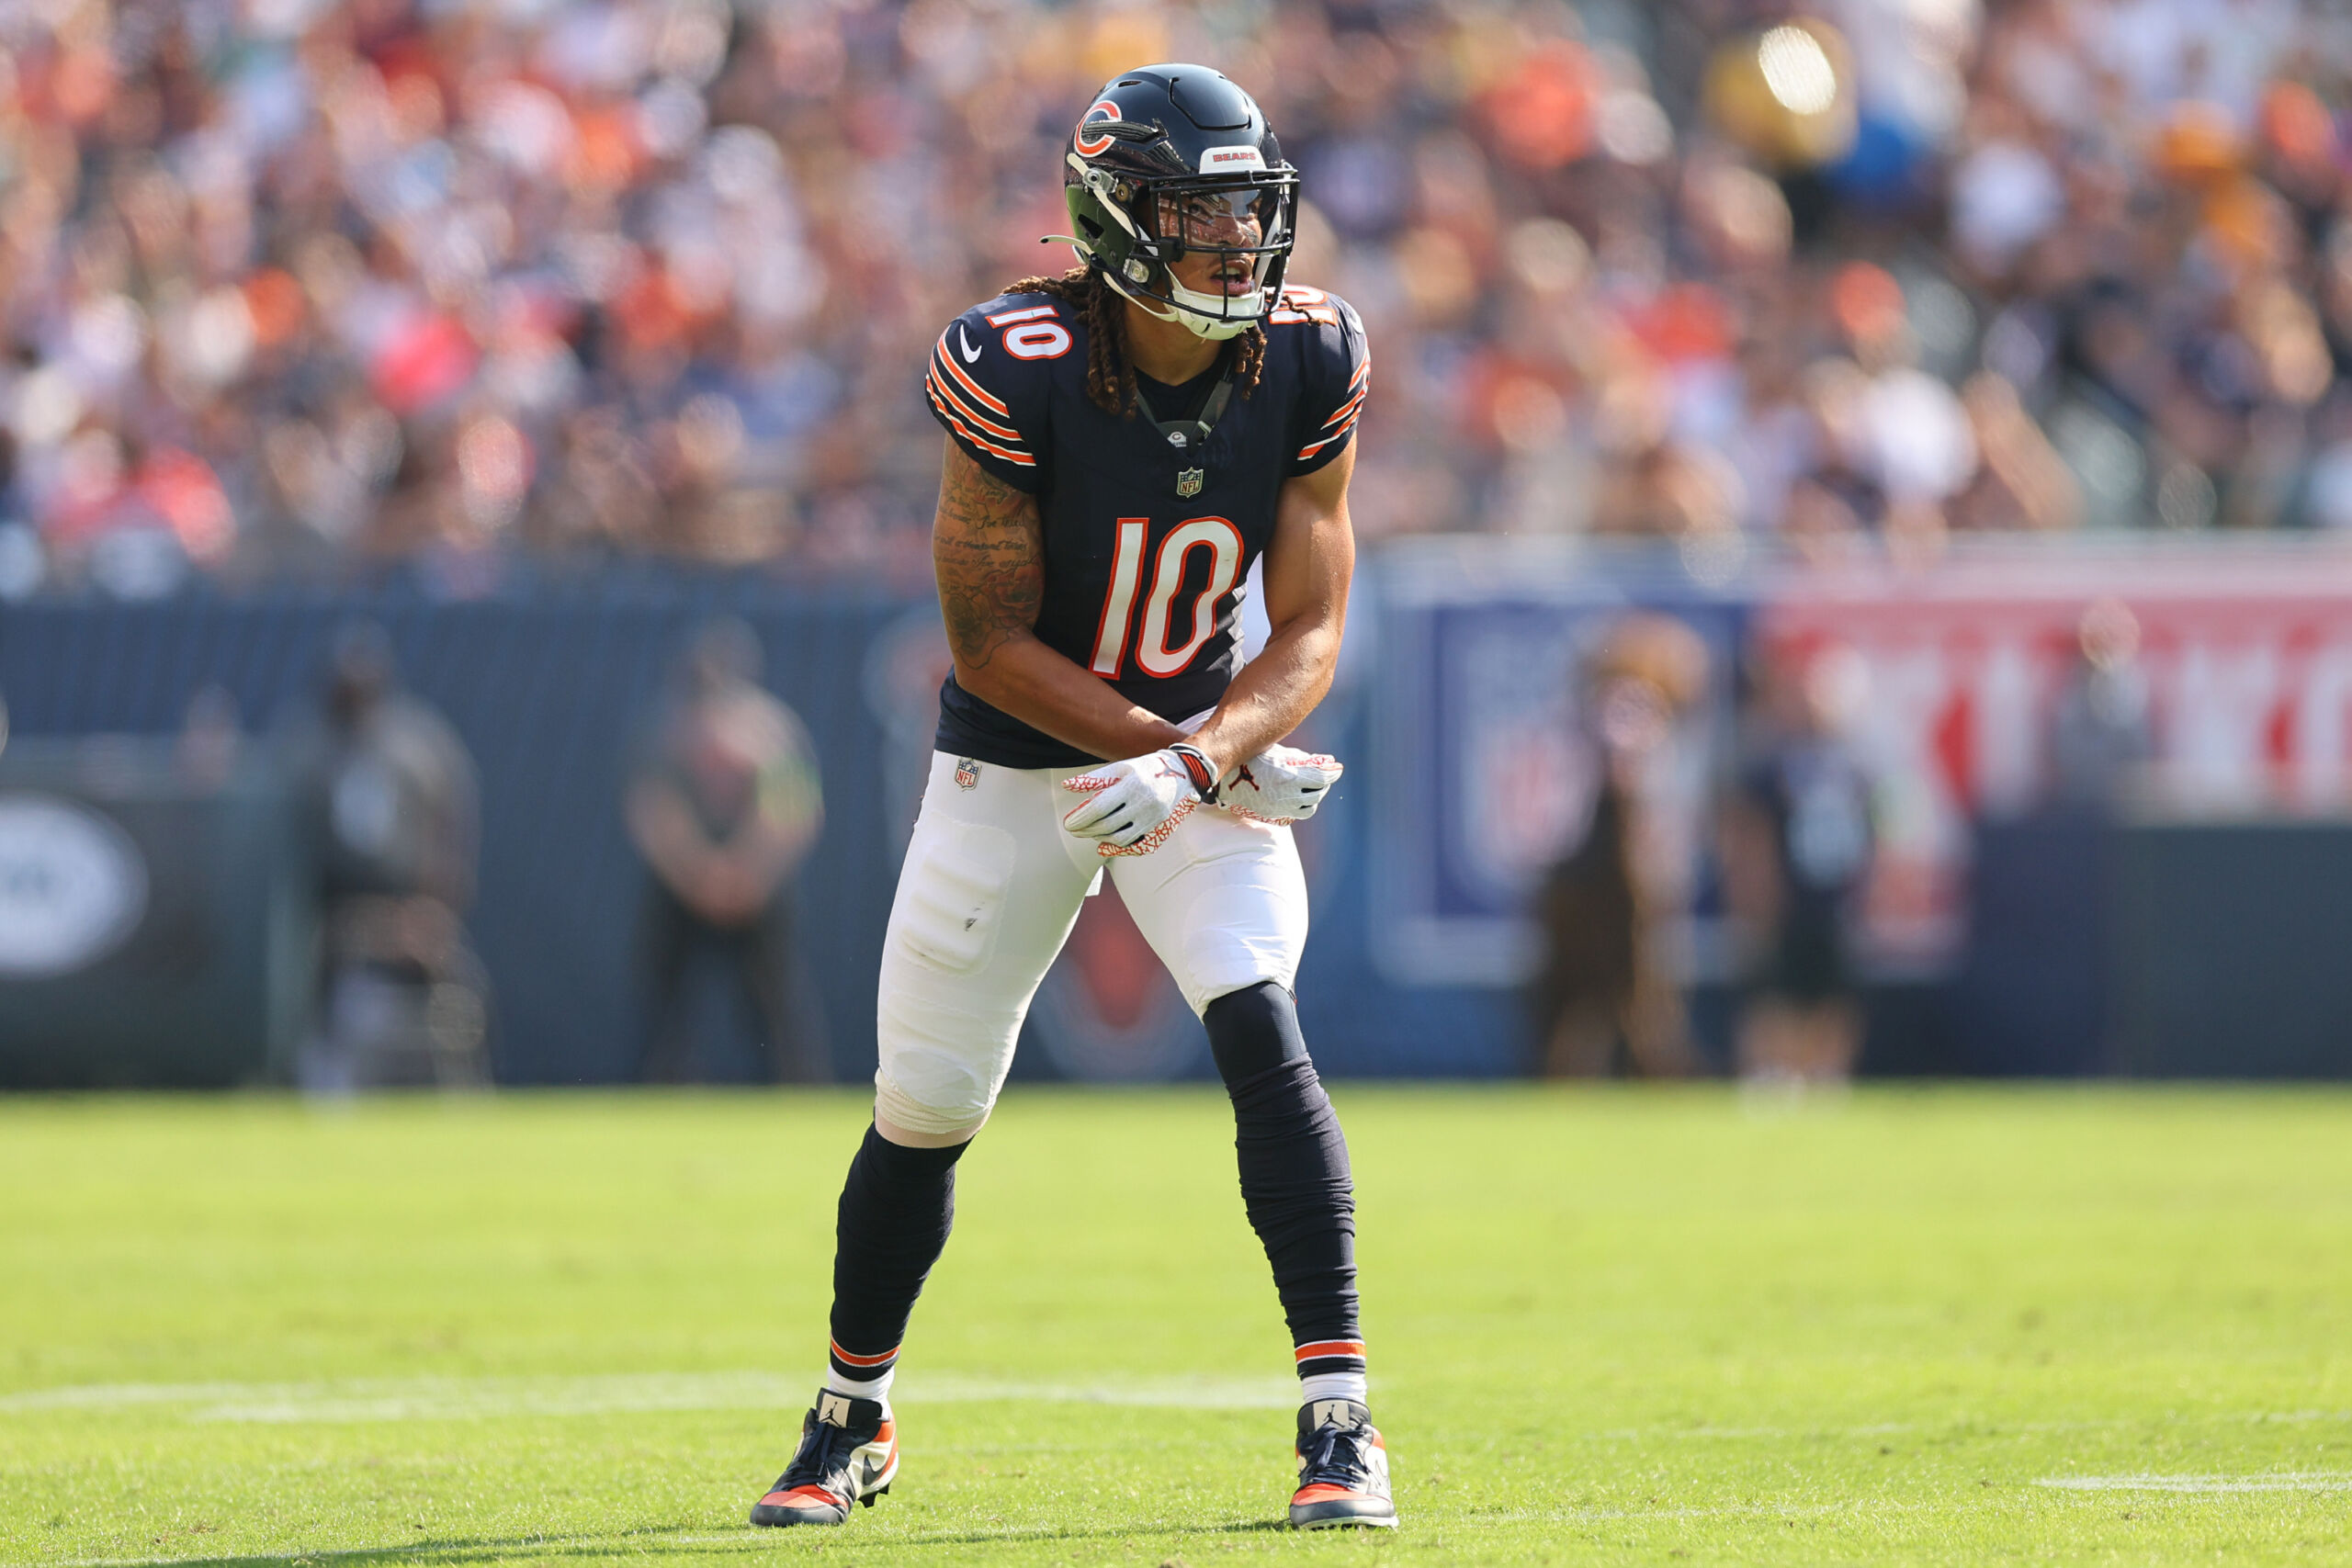 NFL - The Chicago Bears are debuting their alternate